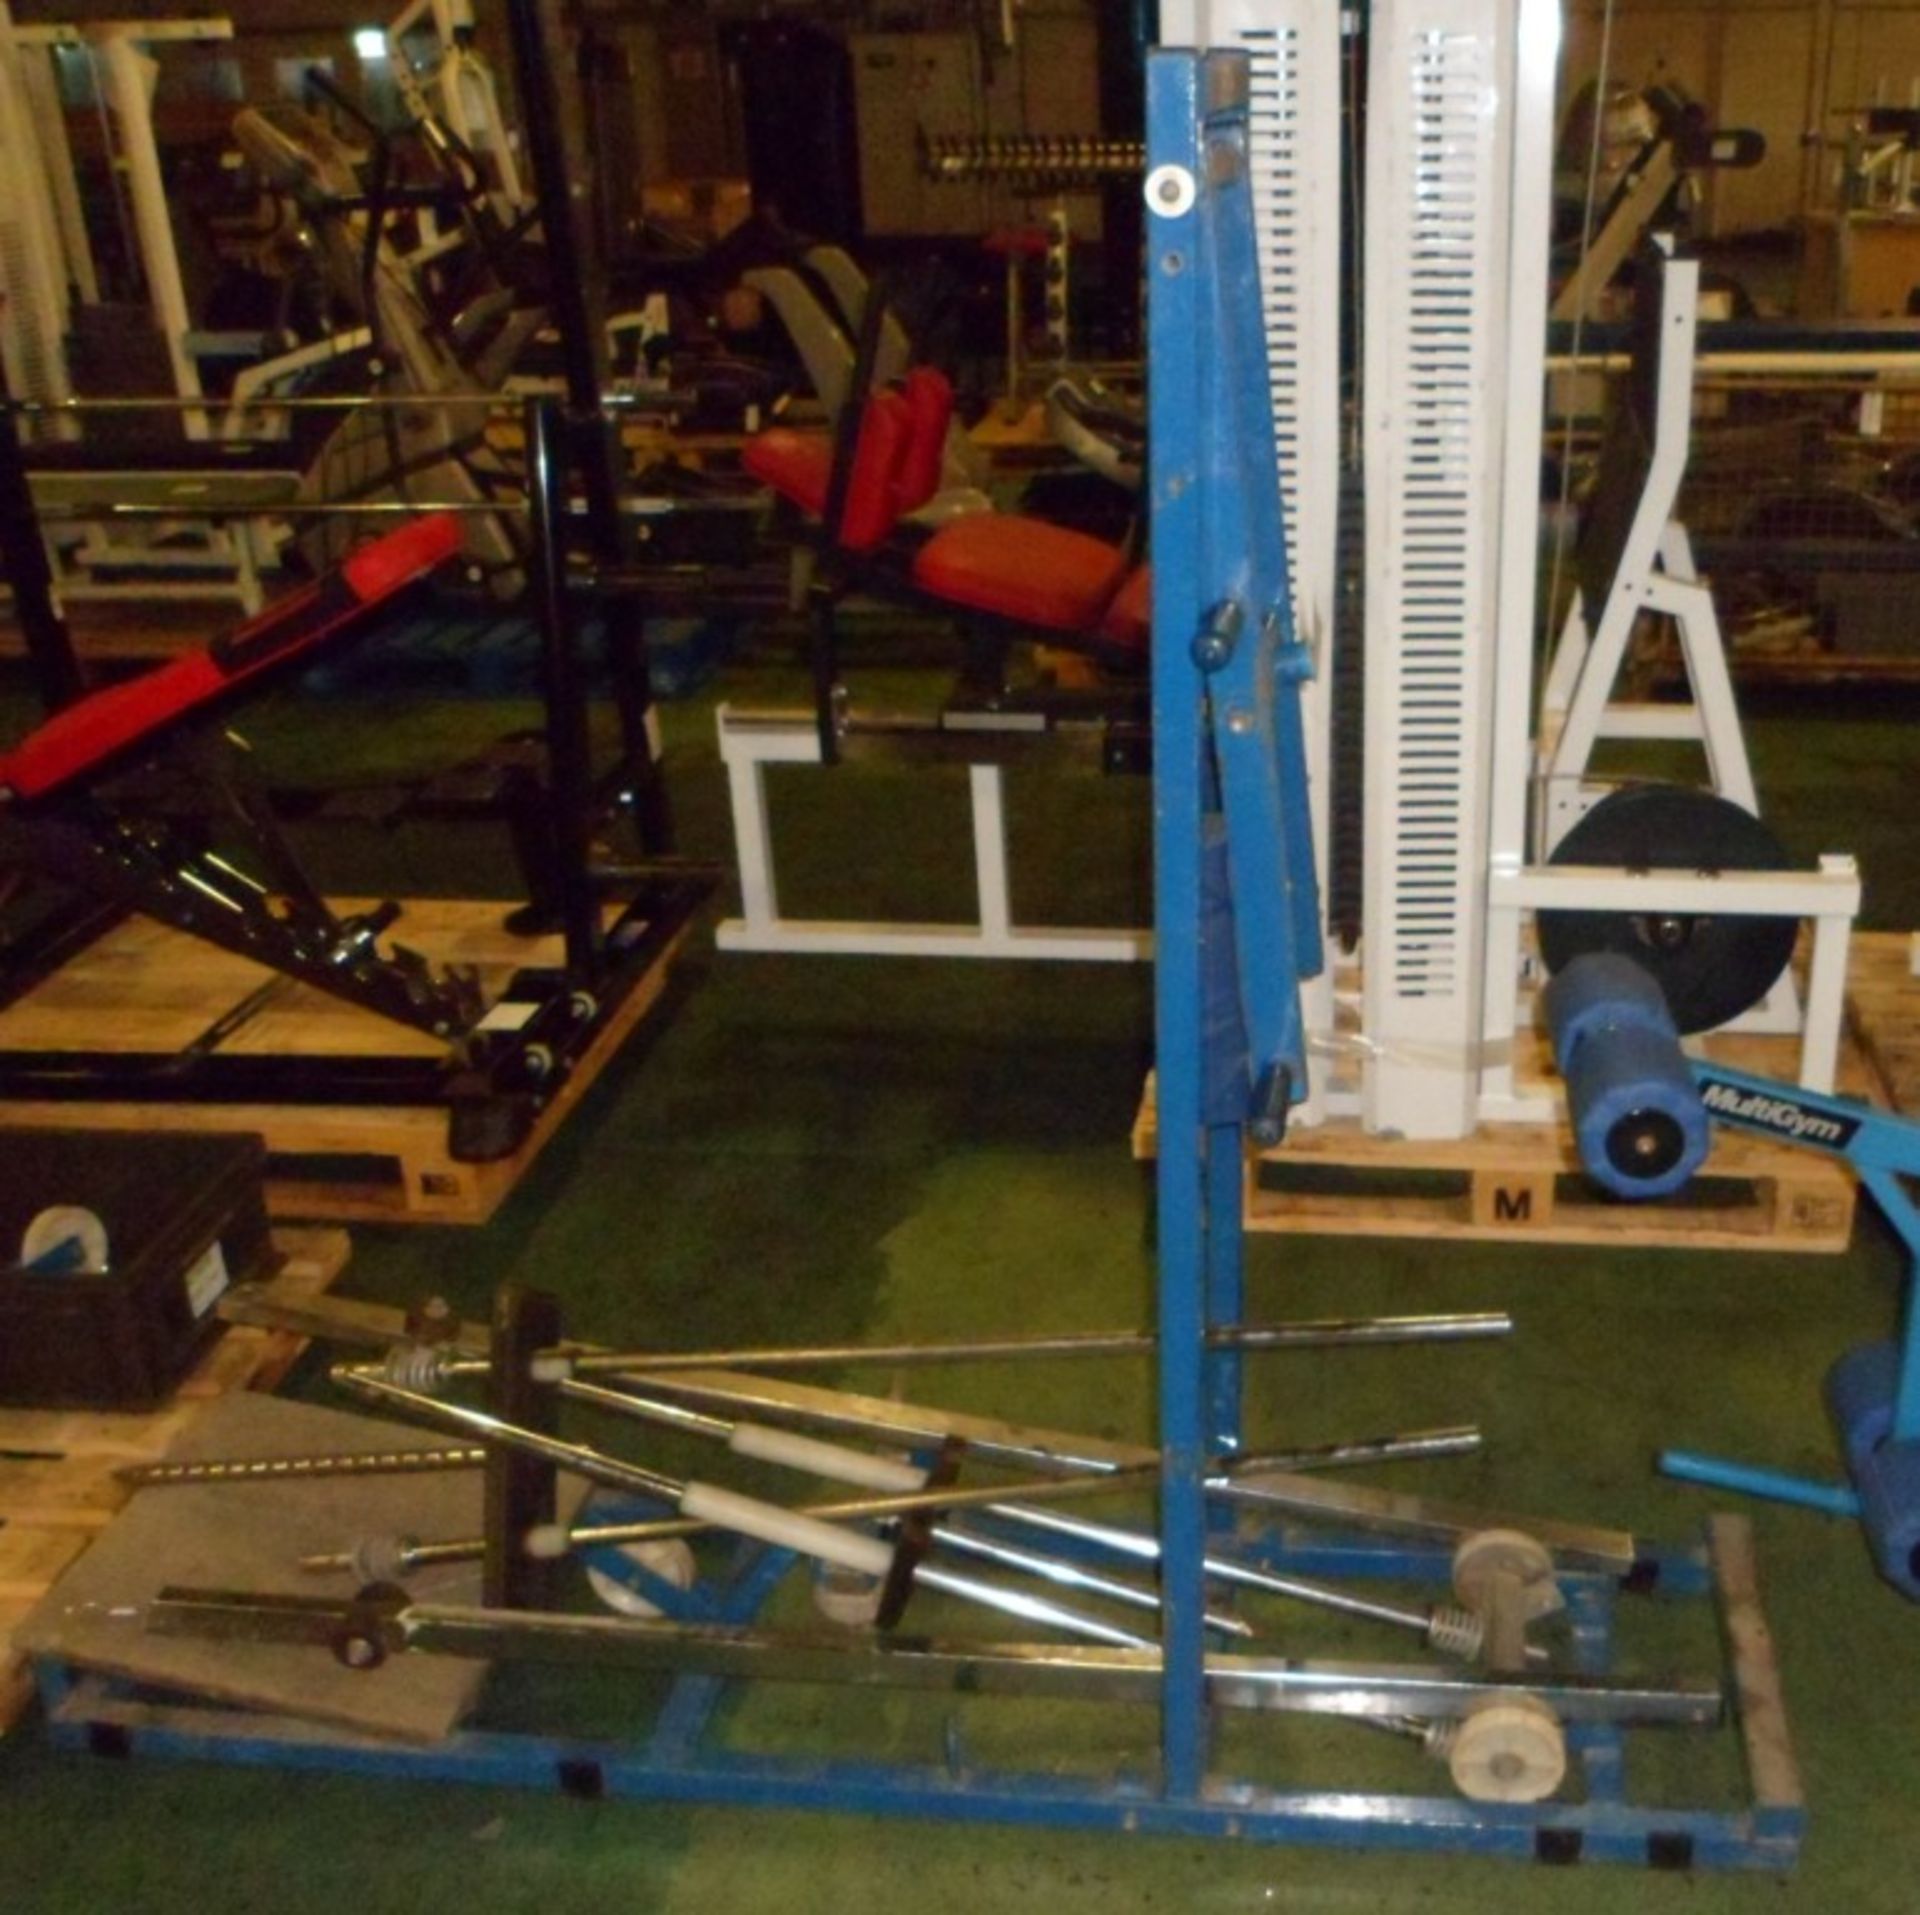 Powersport multigym components - Image 2 of 3